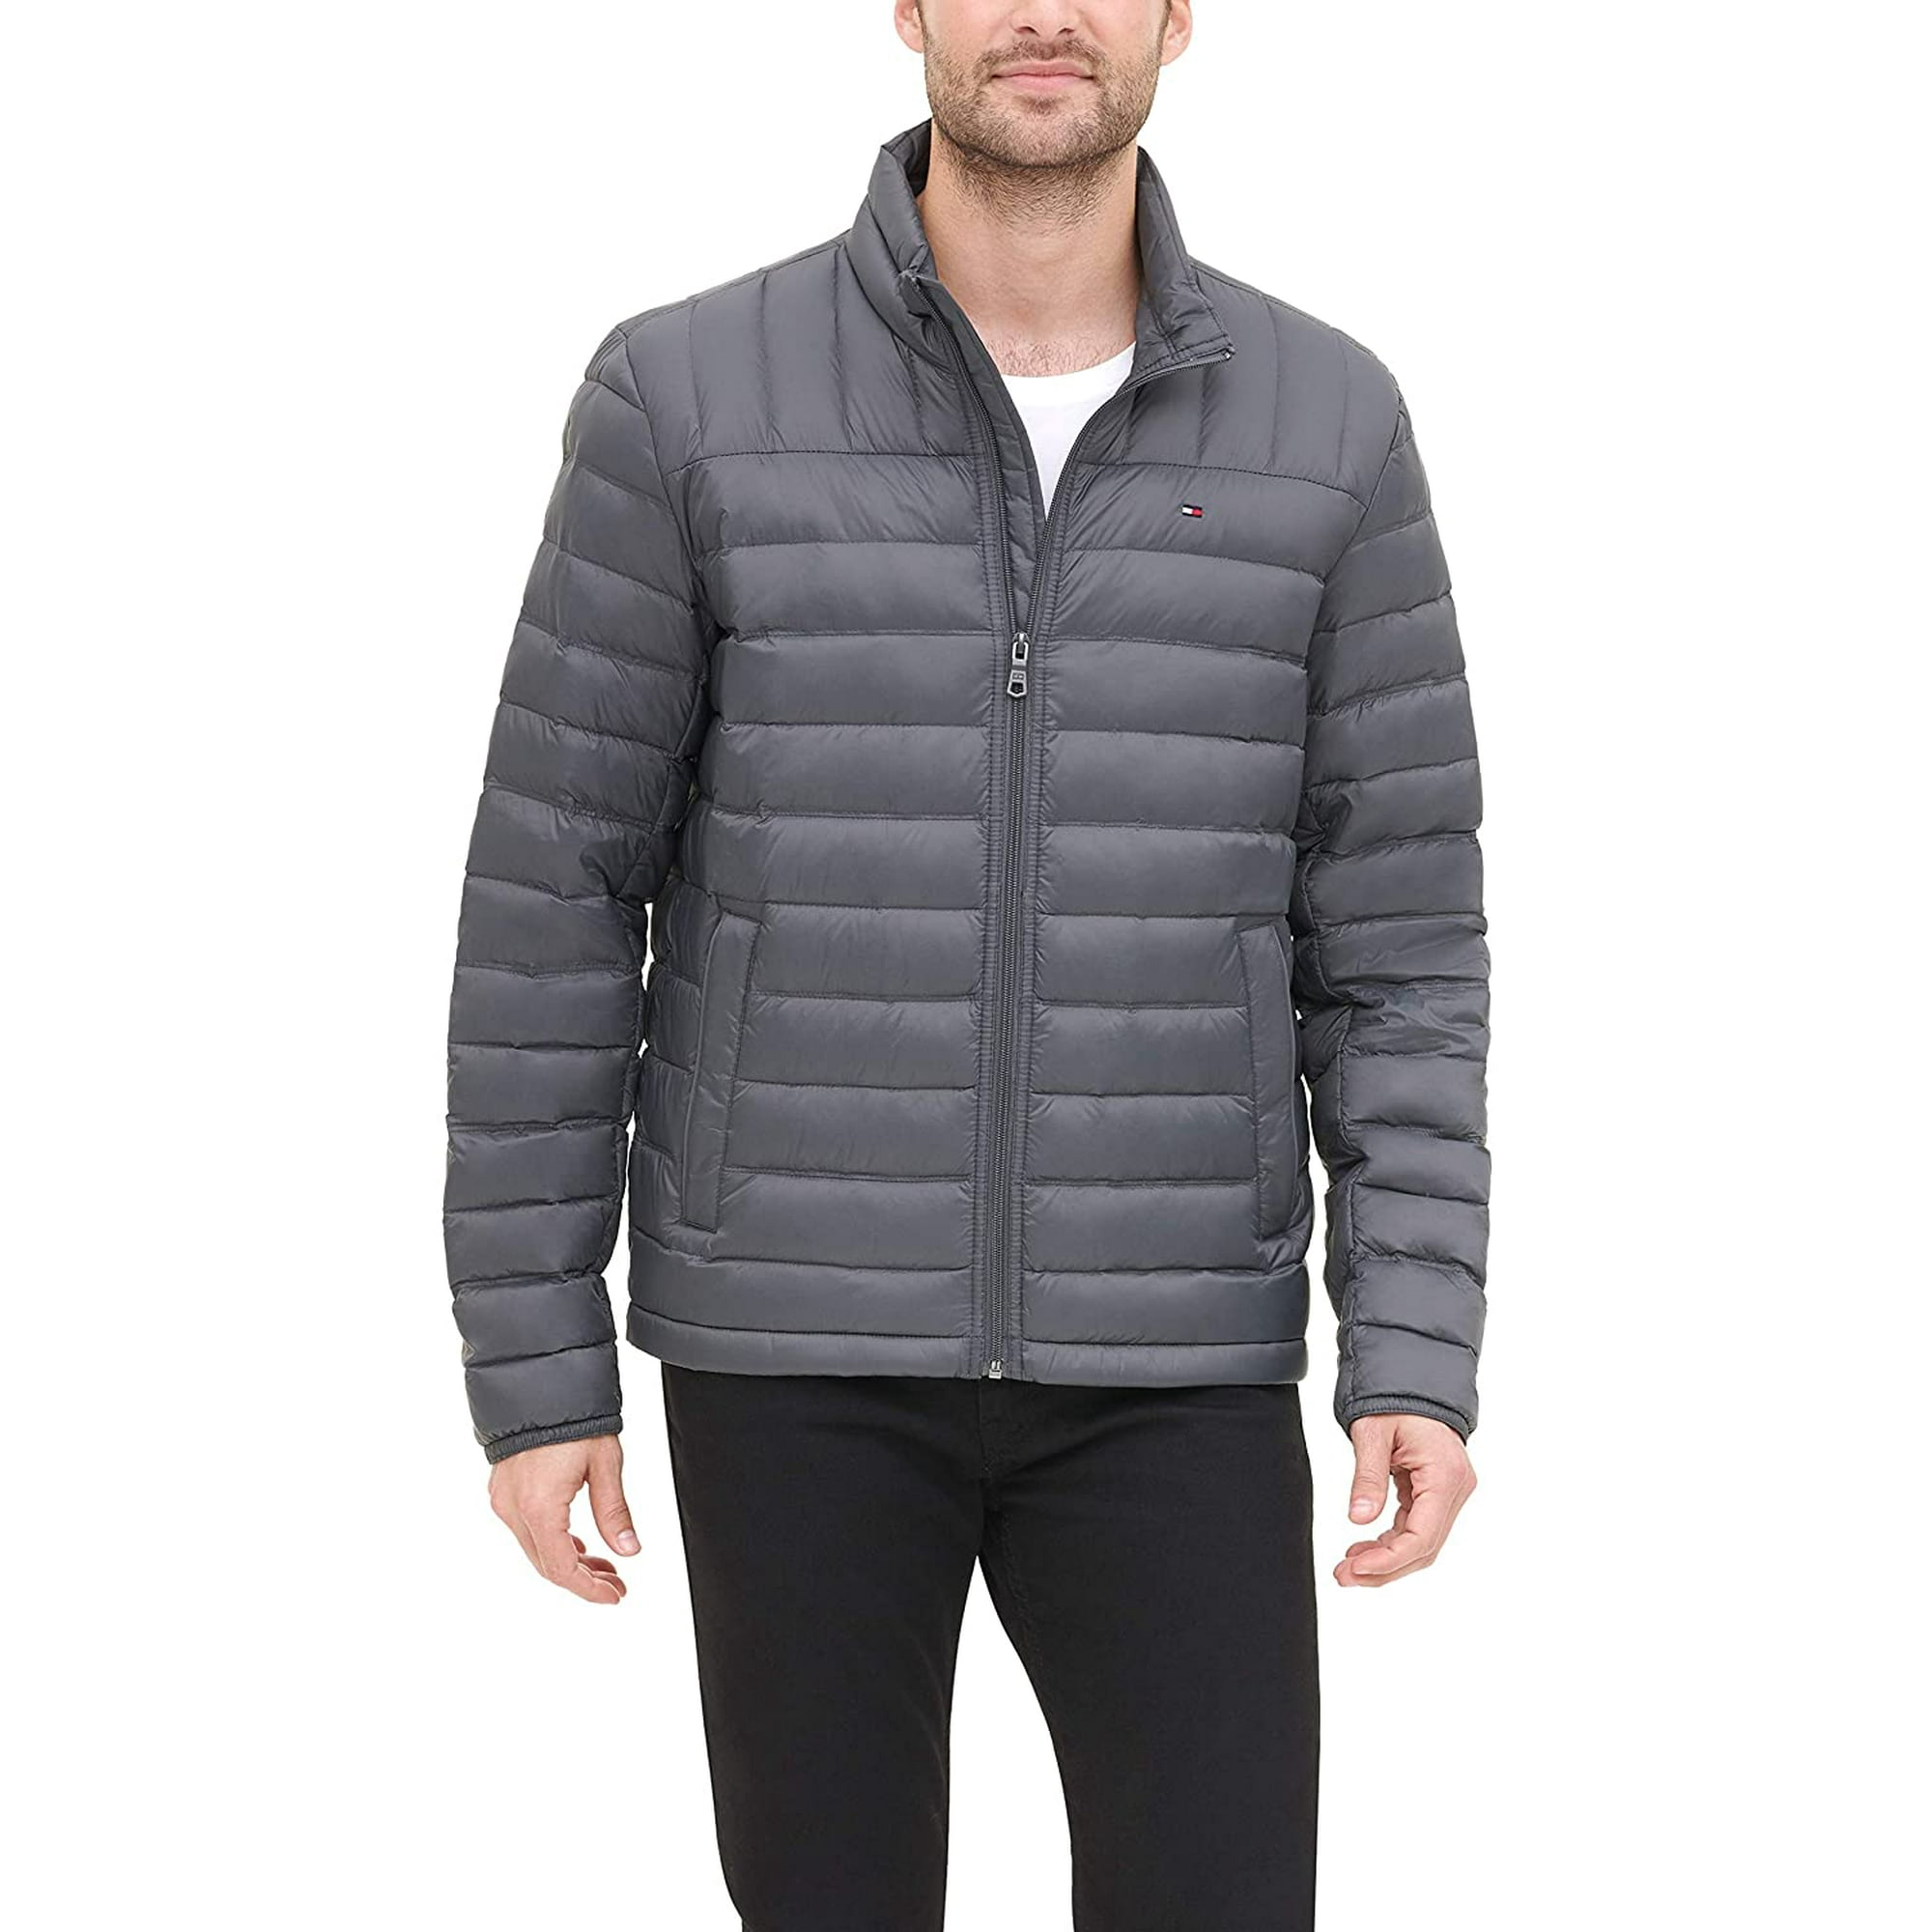 Tommy Hilfiger Mens Packable Down Jacket Regular and Big & Tall Sizes 